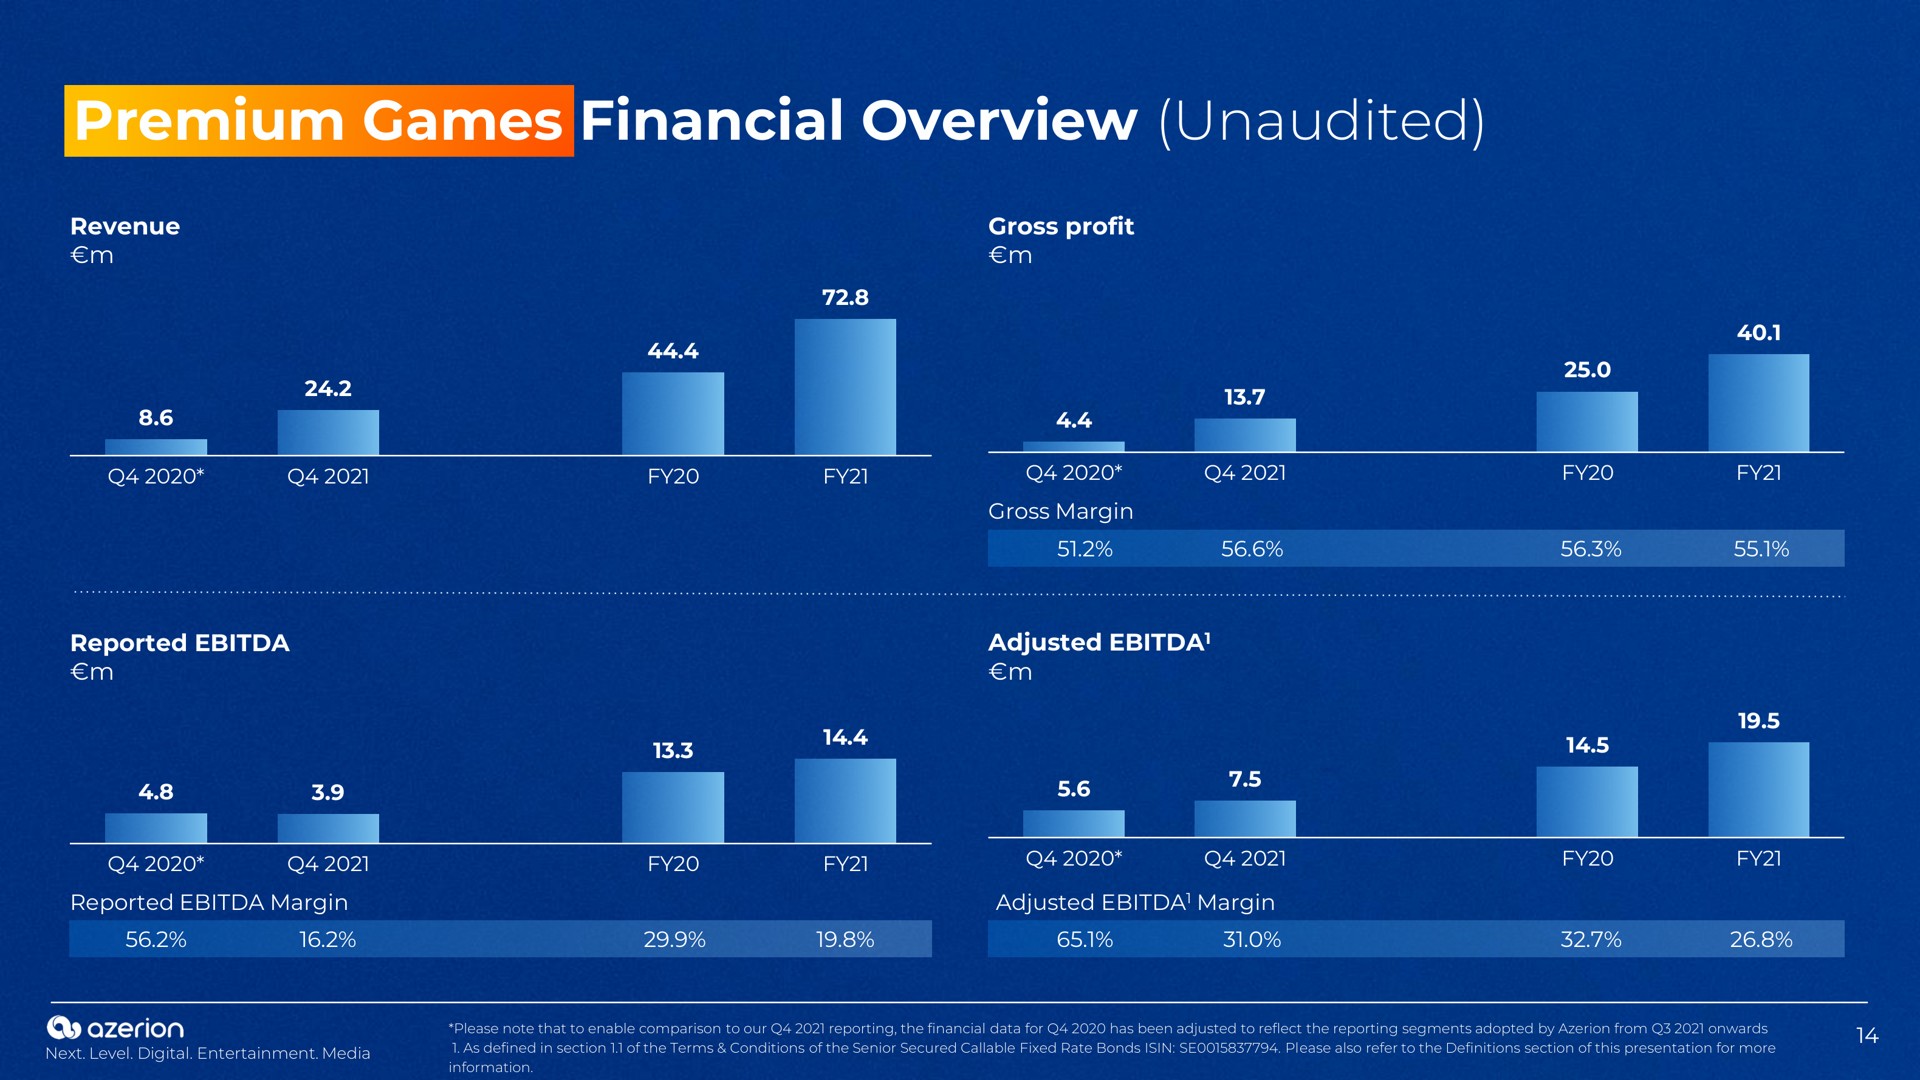 premium games financial overview unaudited | Azerion